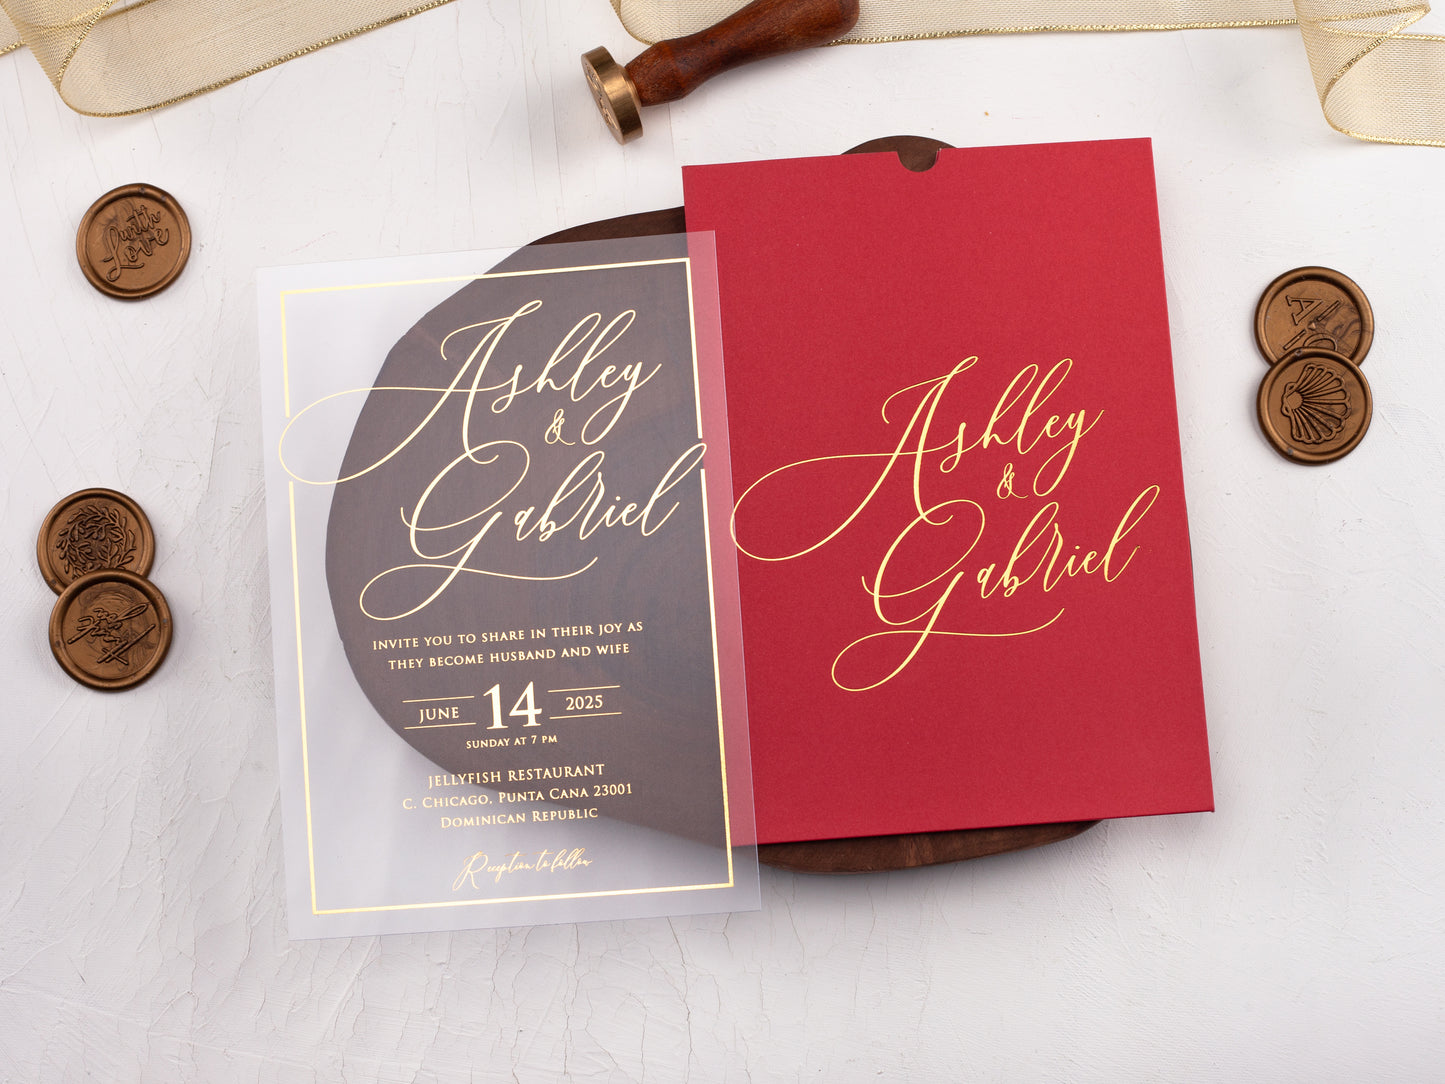 Acrylic Wedding Invitation with Red Envelope and Gold Foil Print